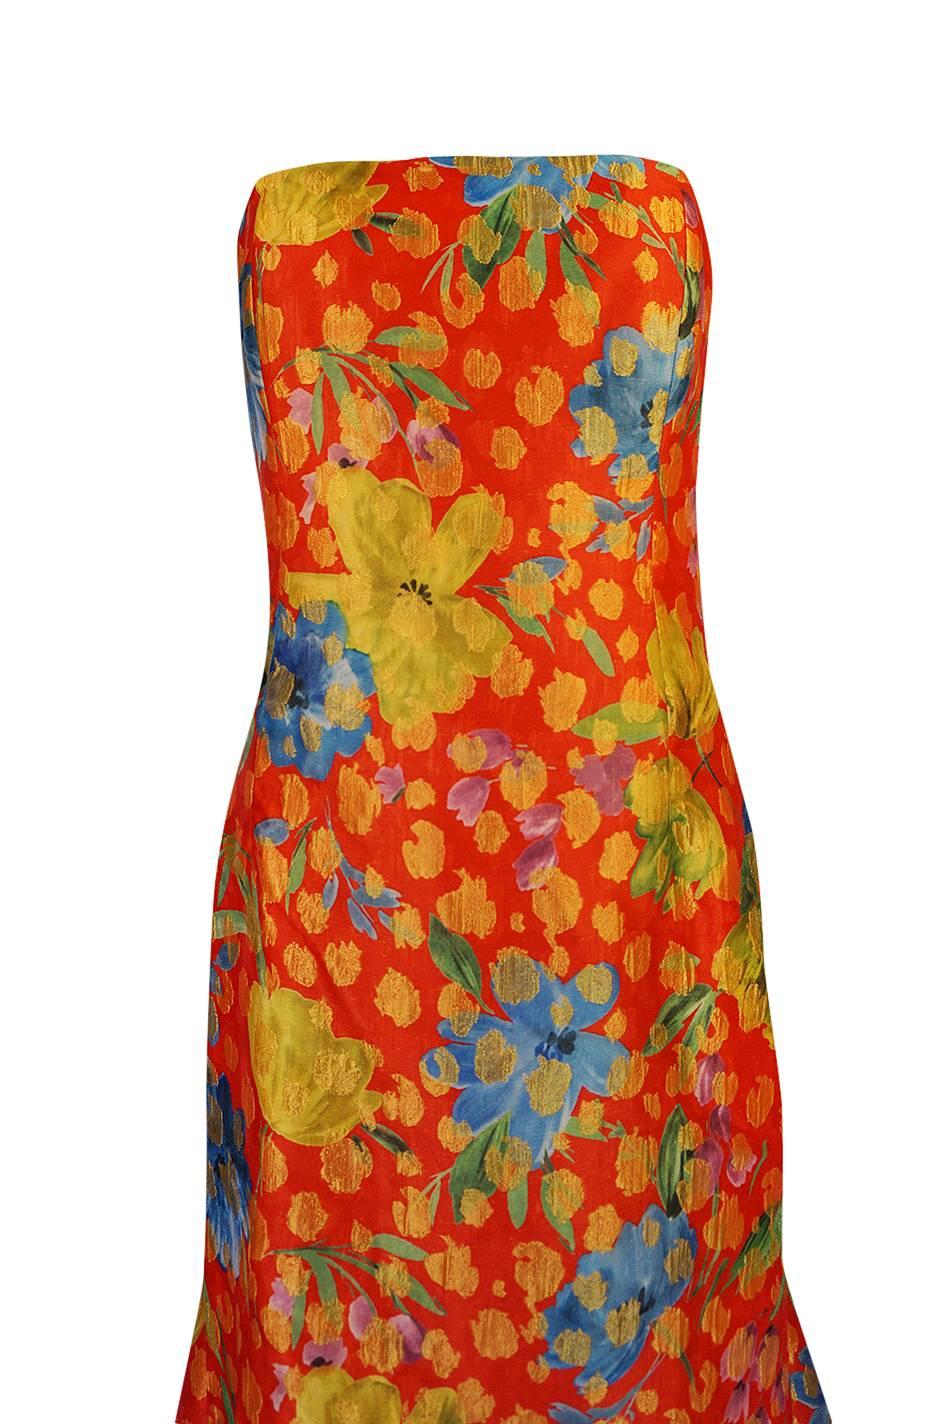 Sully Bonnelly Red and Gold Floral Strapless Trained Dress, circa 1998 1